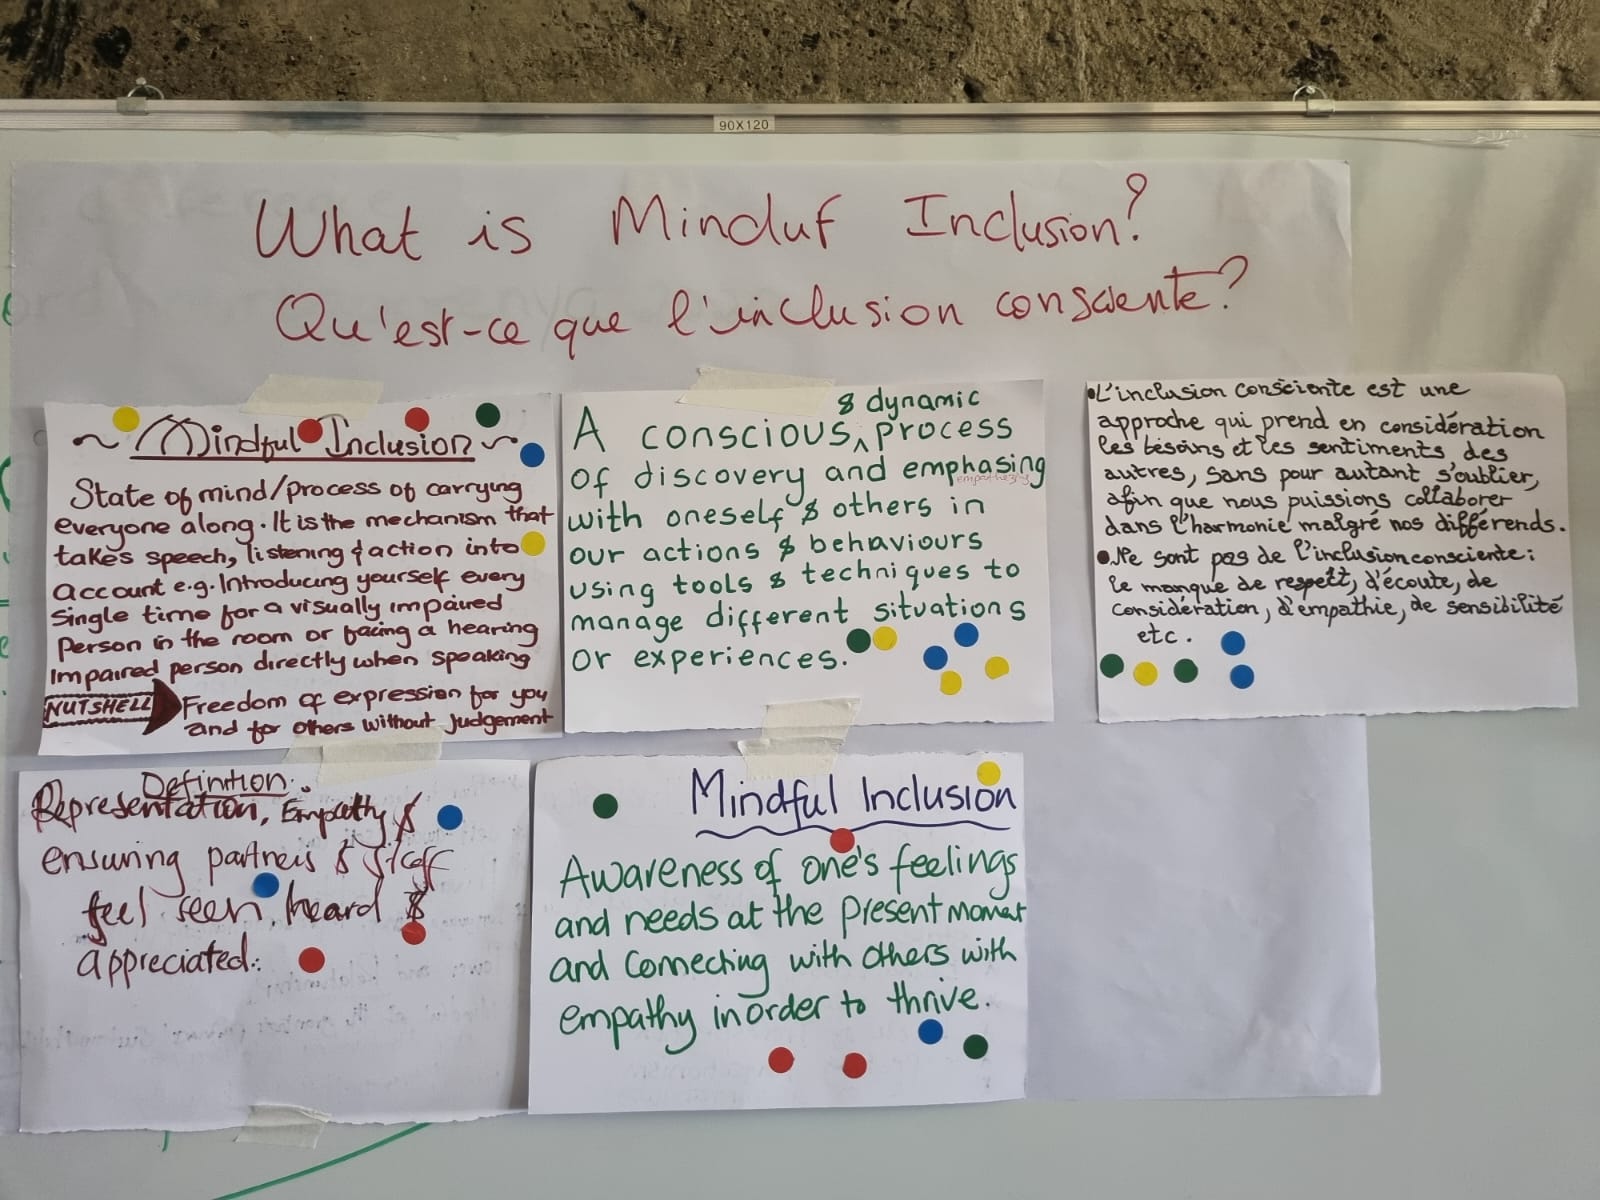 A sharing on what mindful inclusion means for each of us